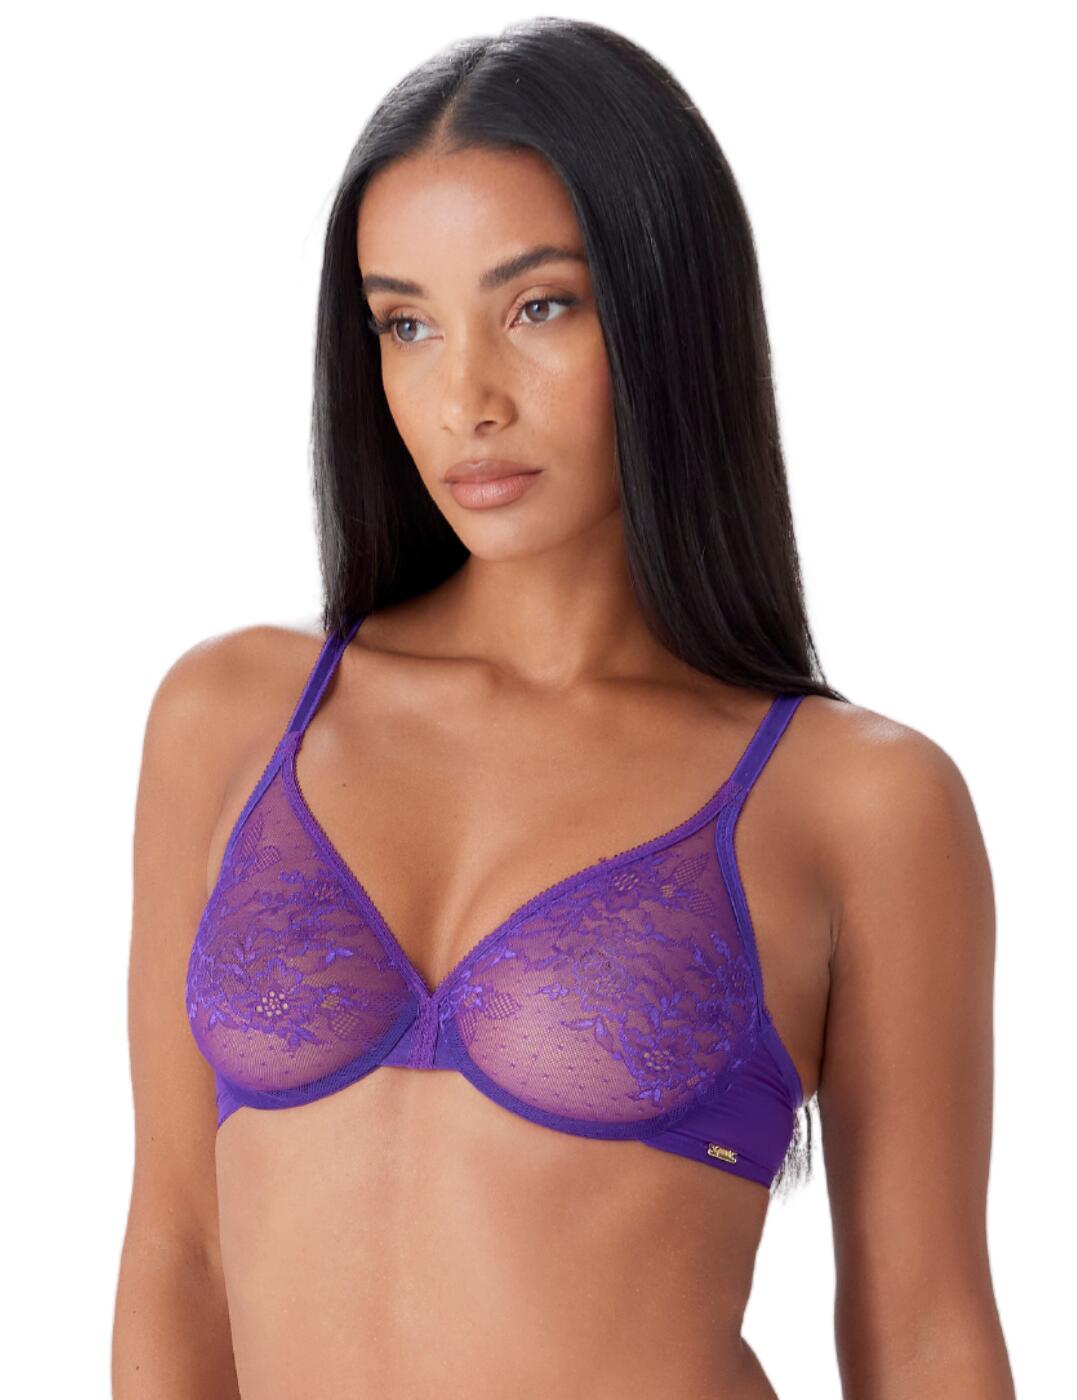 Glossies Lace Sheer Moulded Bra - Ultra Violet - Gossard®